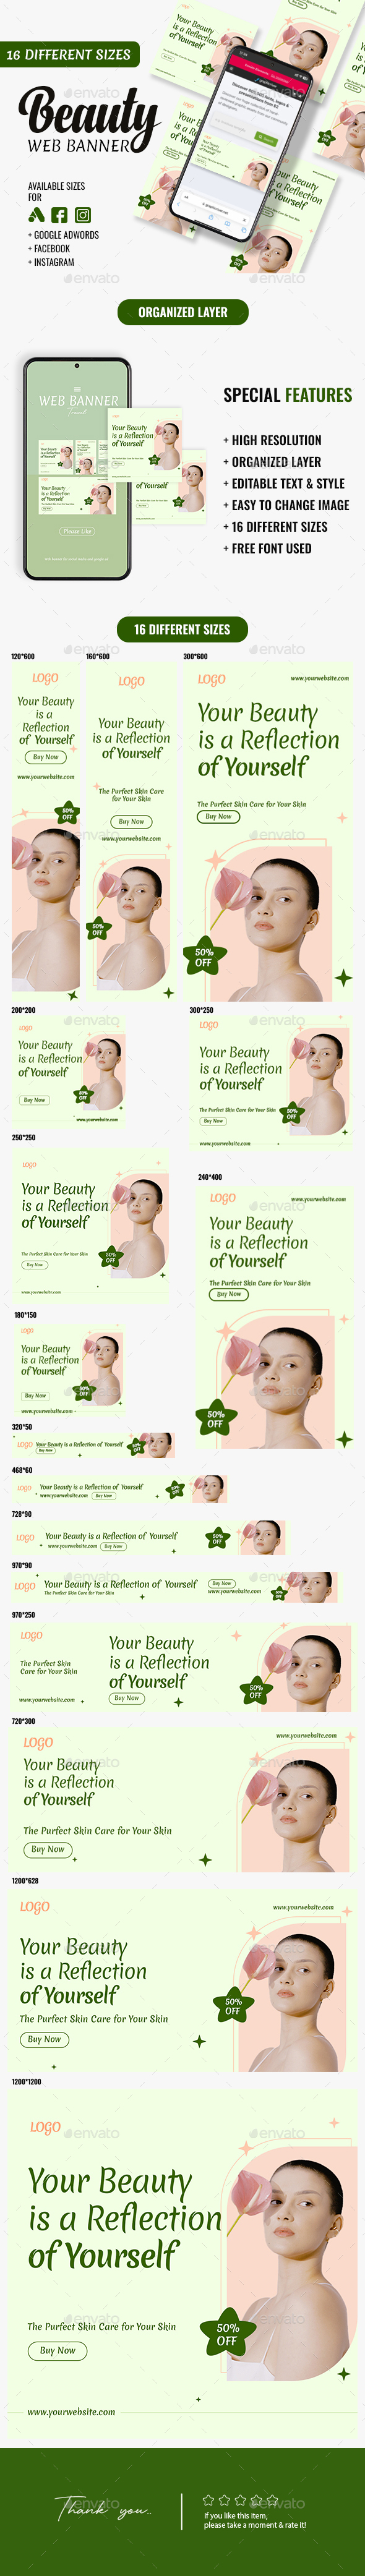 Beauty and Skincare Web Banners Ad